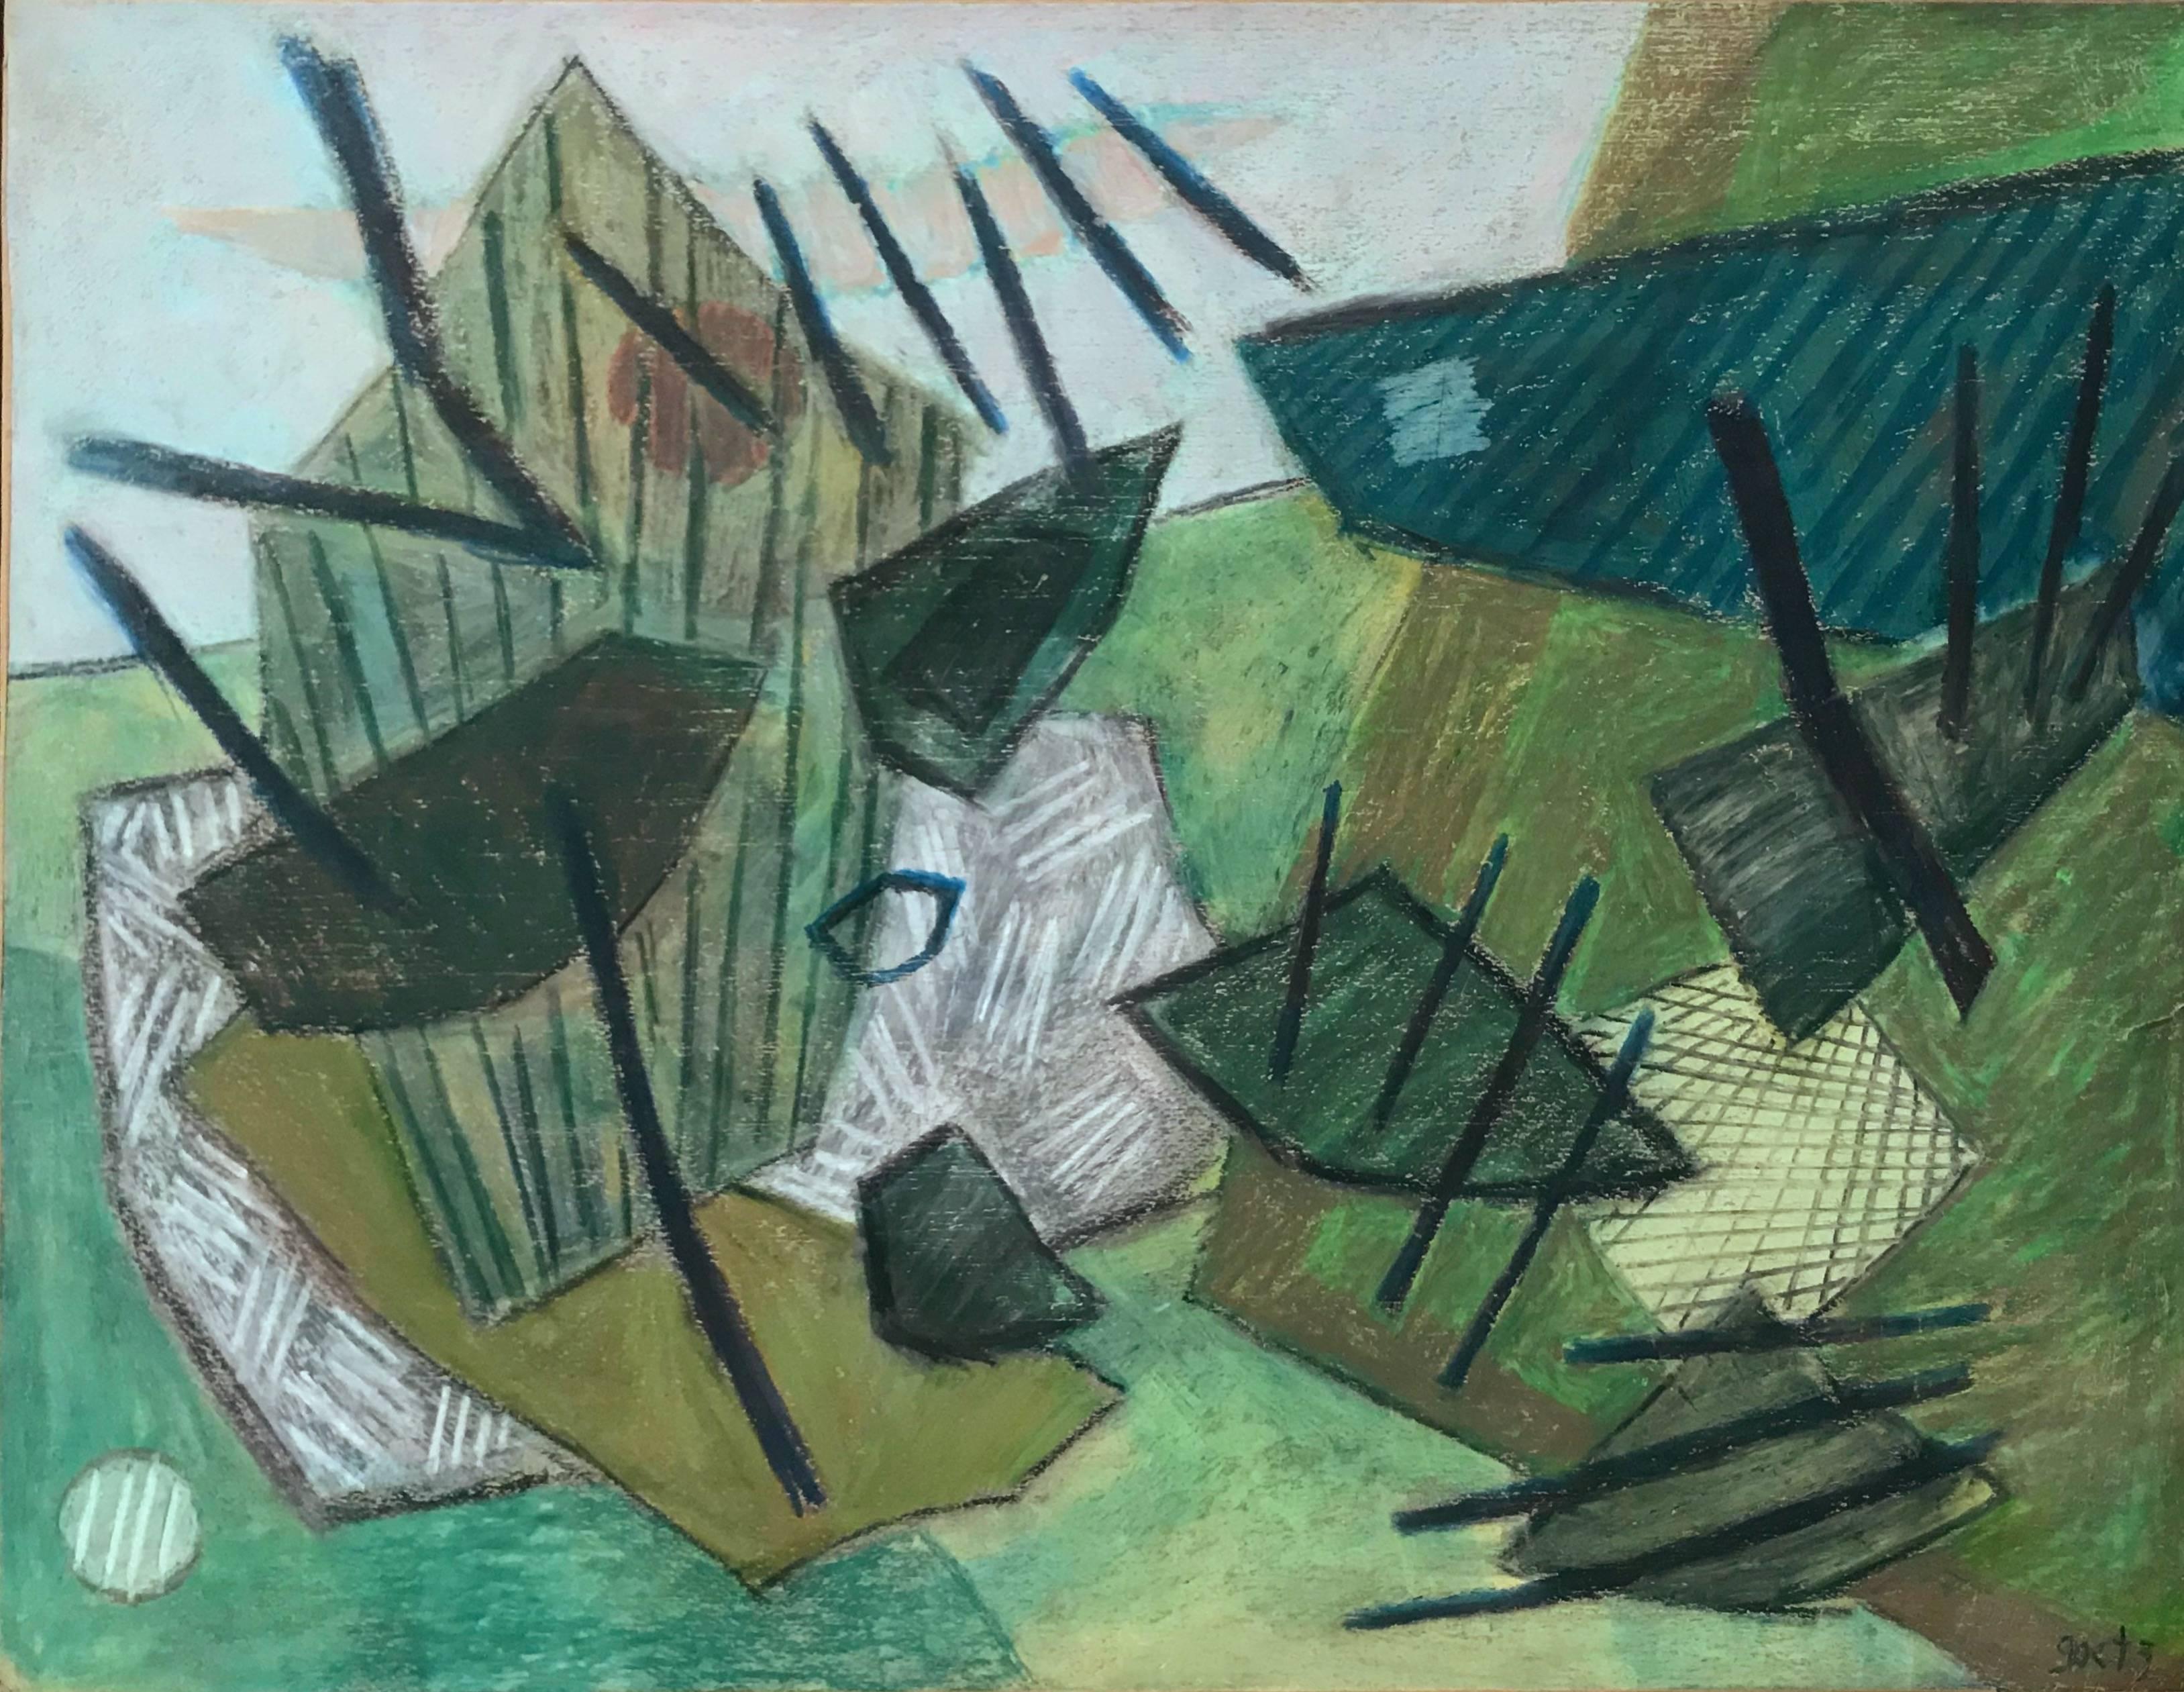 Henri Goetz (1909-1989) Untitled, Circa 70's, oil pastel on paper applied on canvas, signed lower right.

SIZE: 50 x 65 x 0.1
SIZE WITH FRAME: 67 x 82 x 4.5

Certificate of Authenticity:
Galleria Michelangelo

Provenance:
Paris, France, private